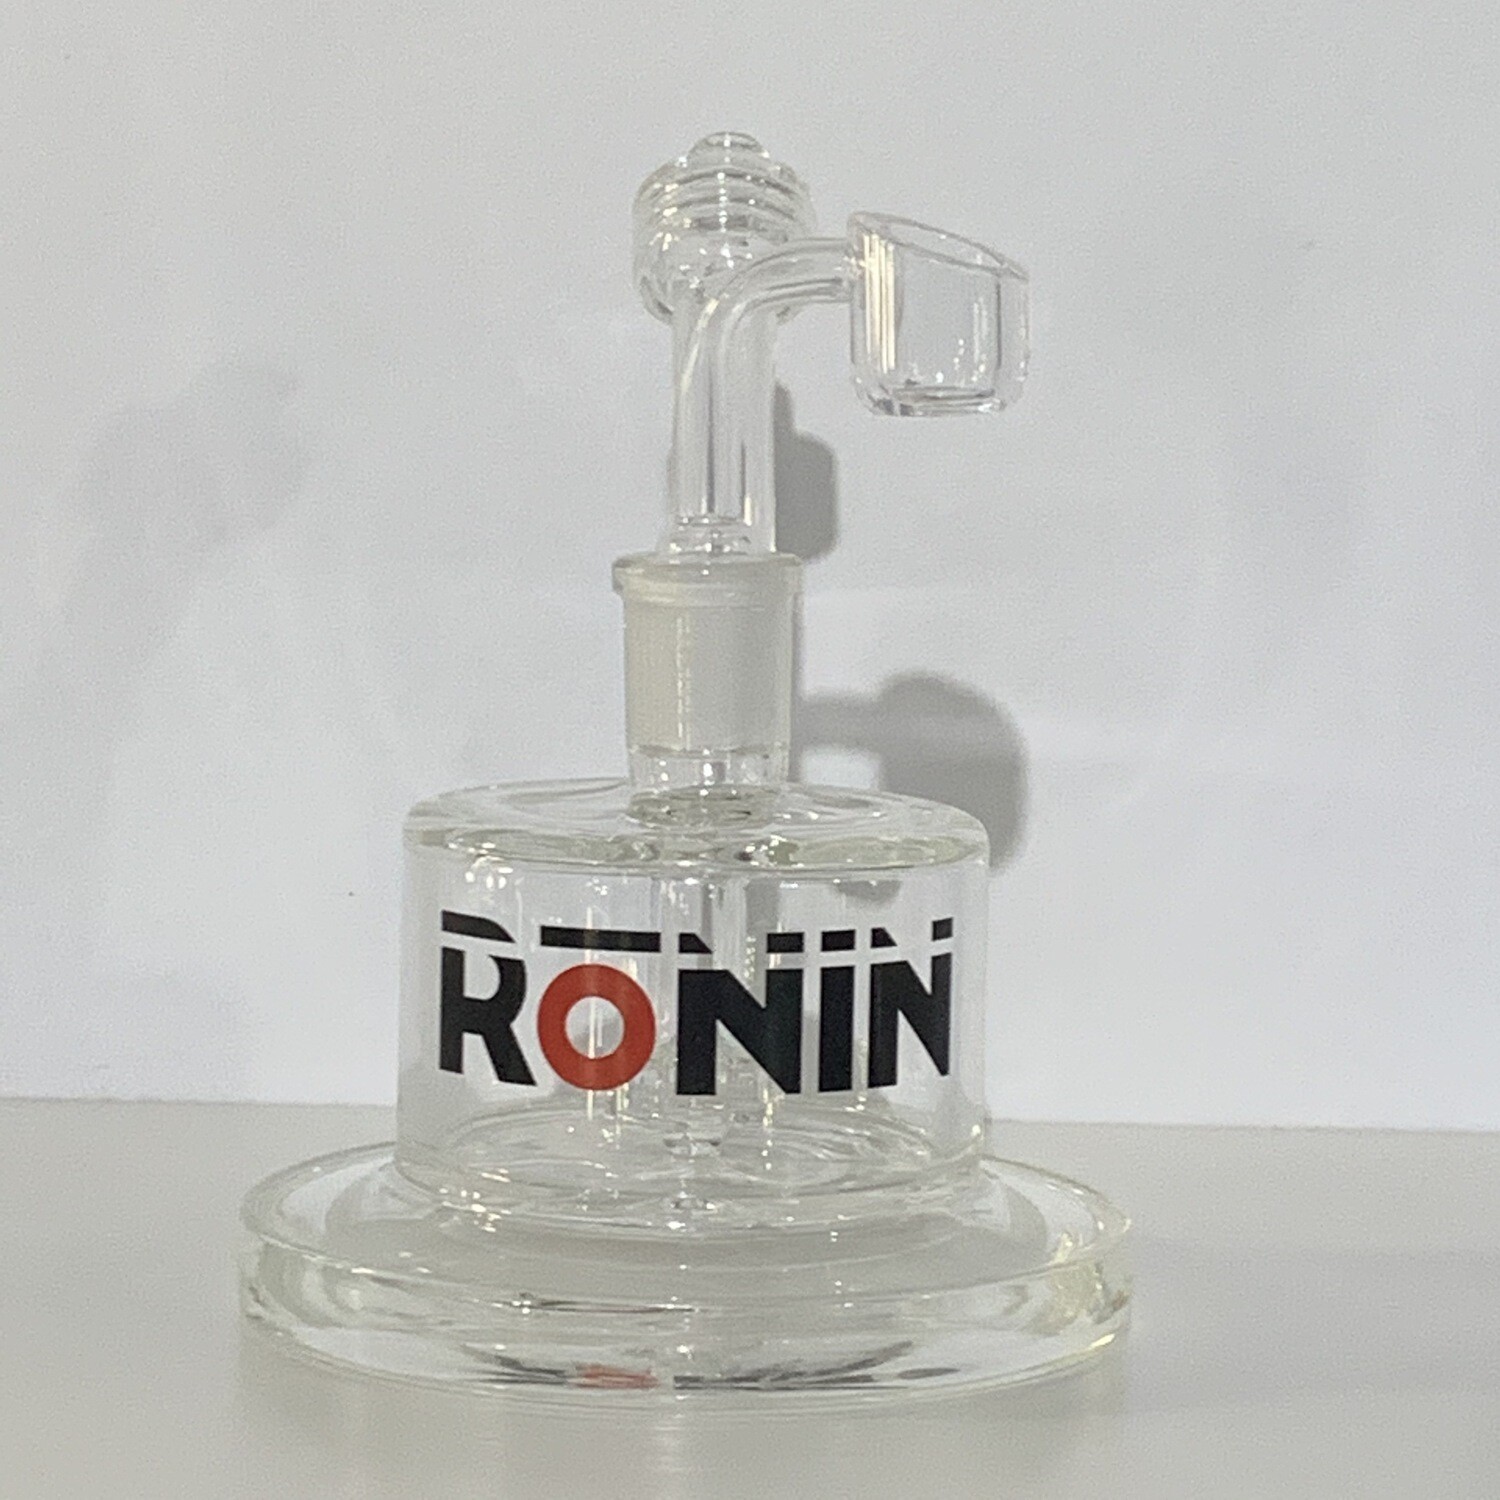 Ronin "Packu" Puck Rig With Showerhead Perc